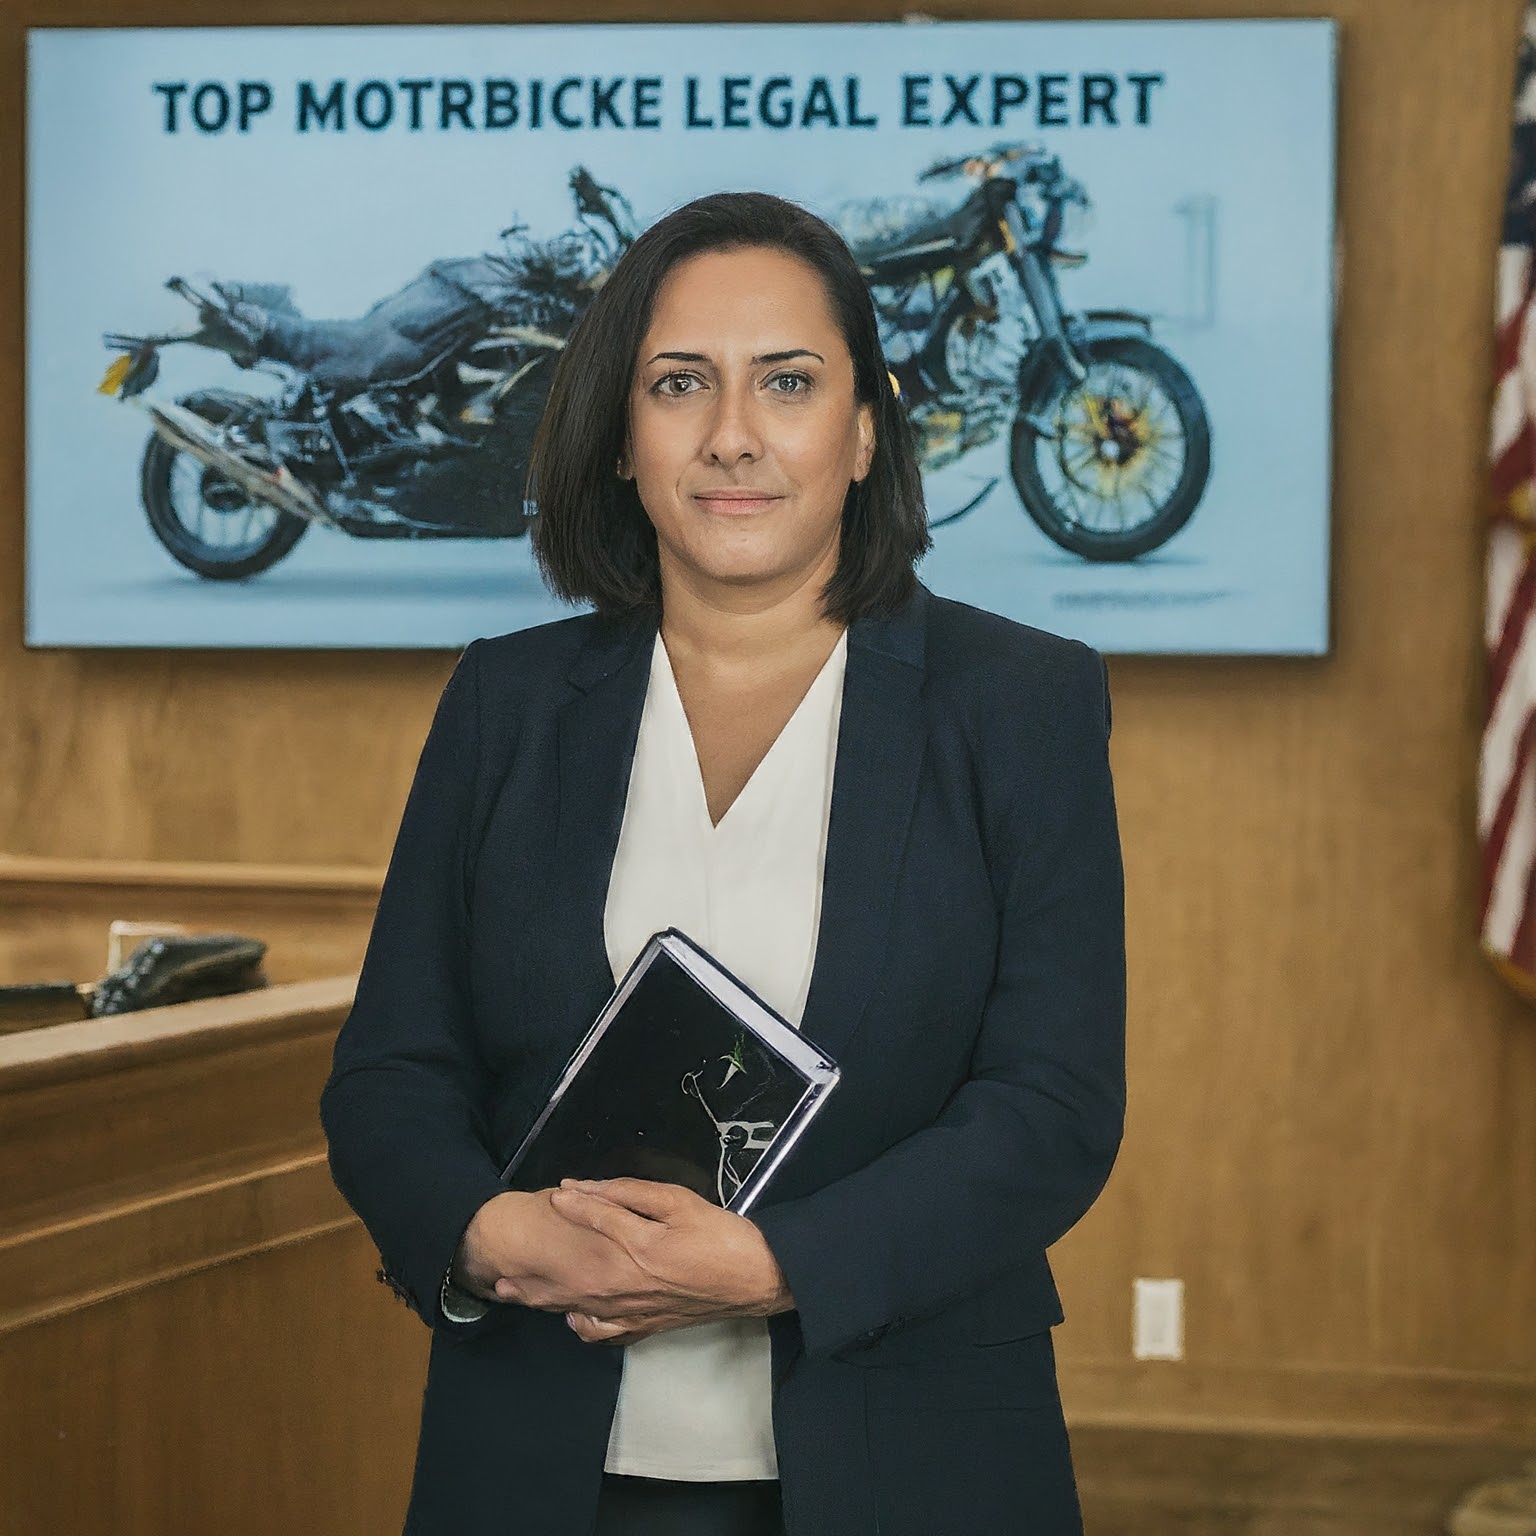 Find Your Top Motorbike Crash Legal Expert Now